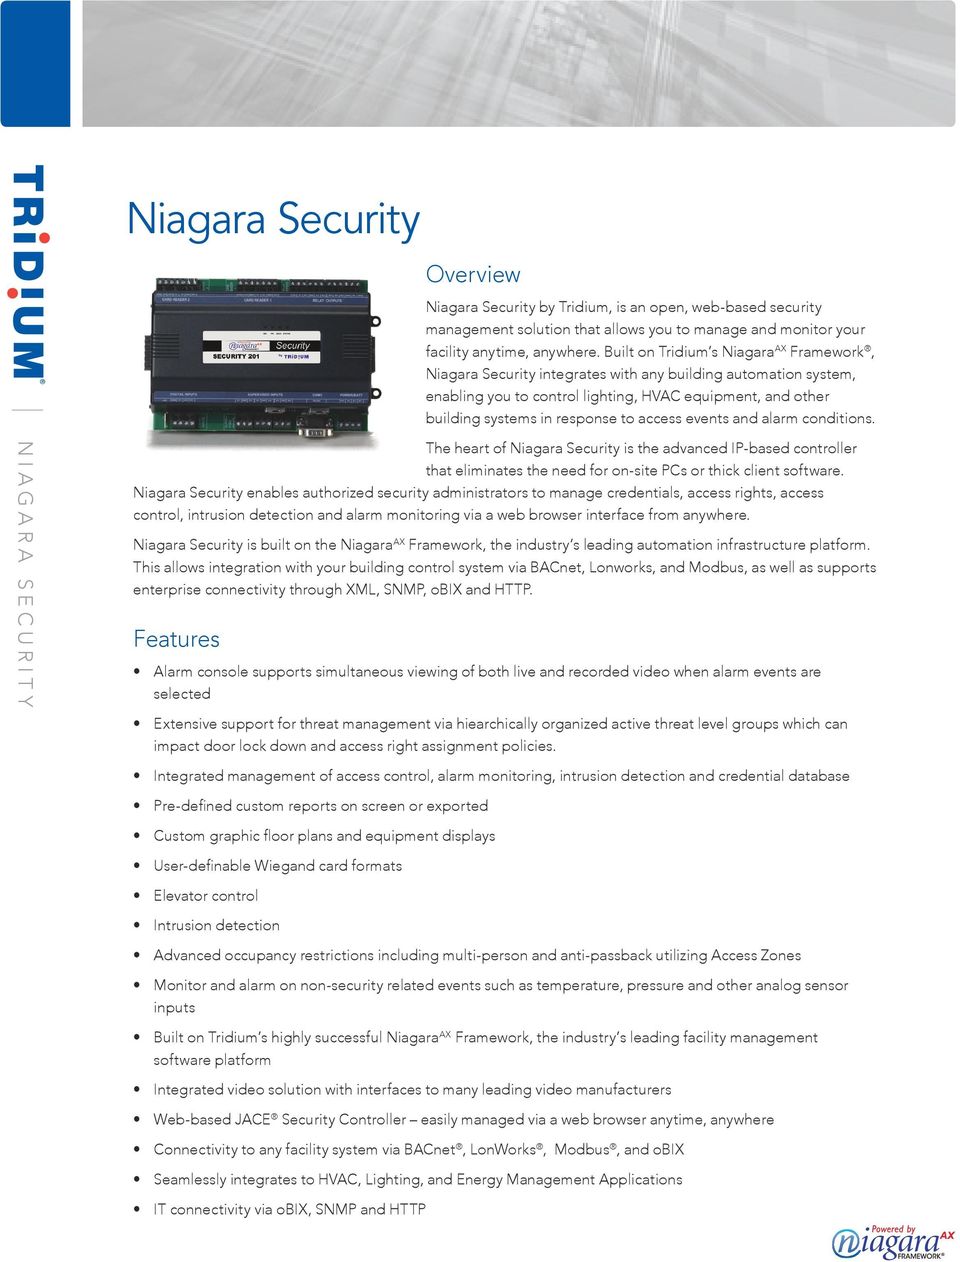 access events and alarm conditions. The heart of Niagara Security is the advanced IP-based controller that eliminates the need for on-site PCs or thick client software.